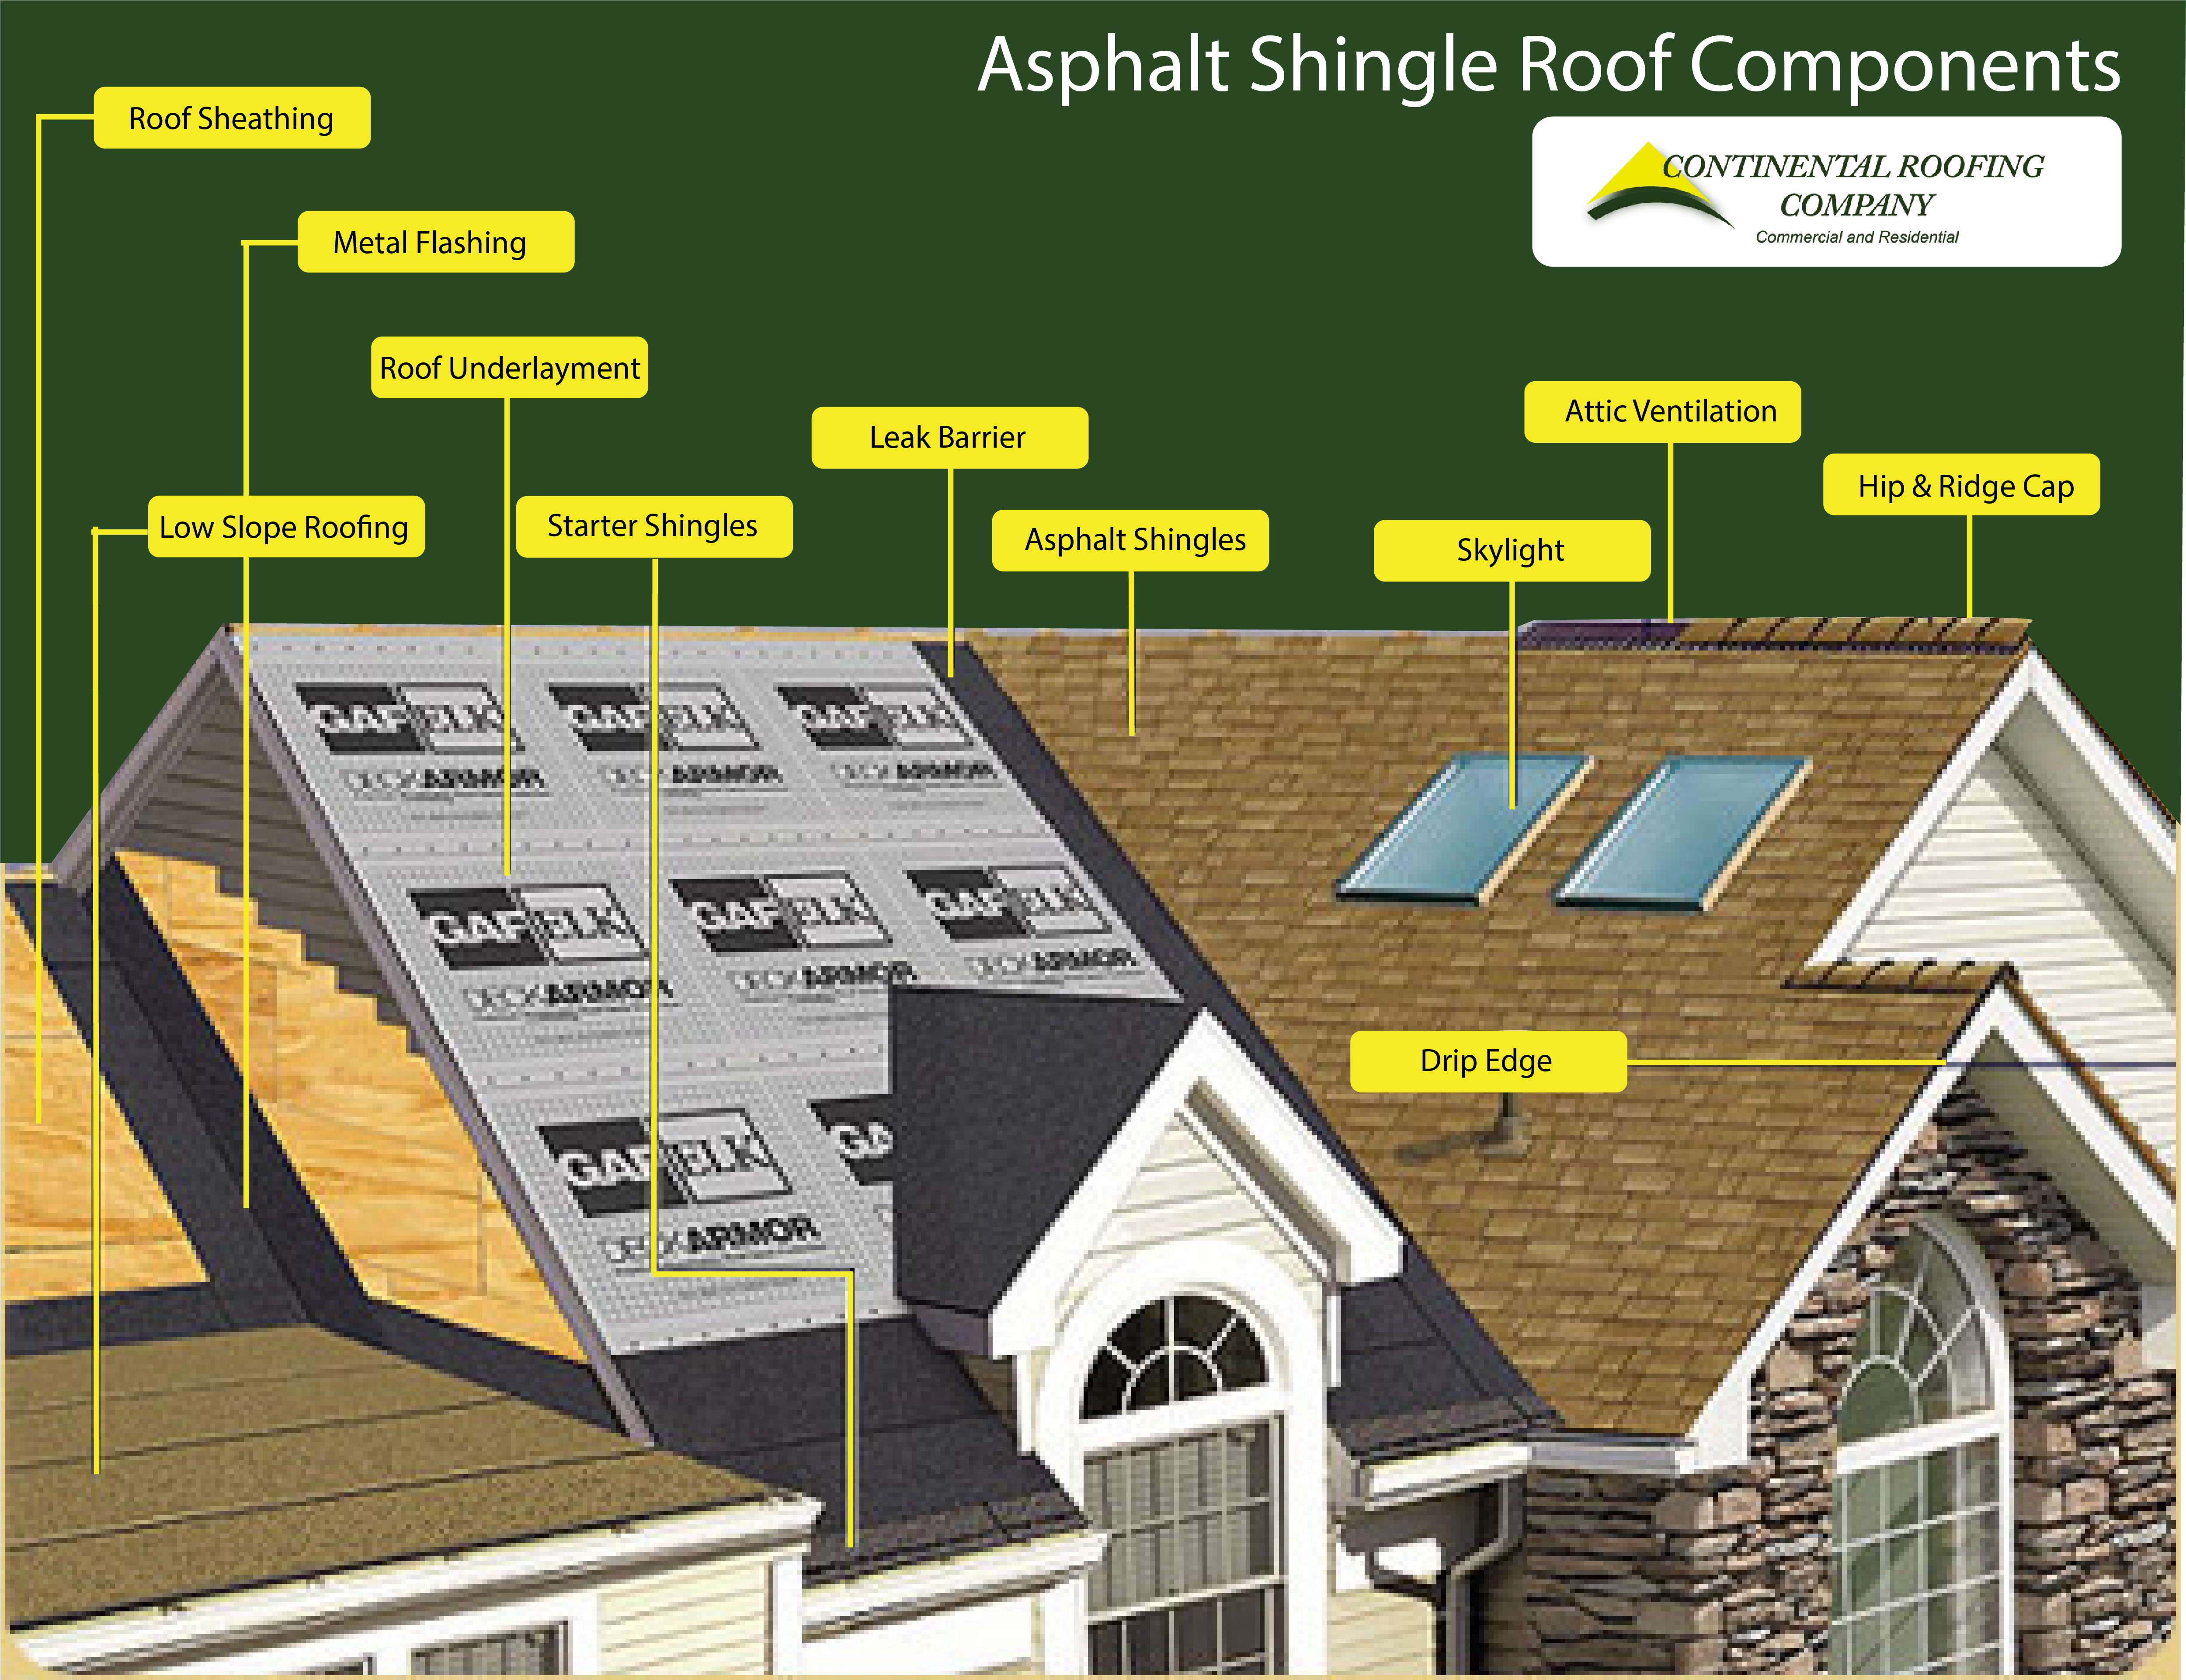 Image of a cut-away roof that labels the different roof components of an asphalt shingle system